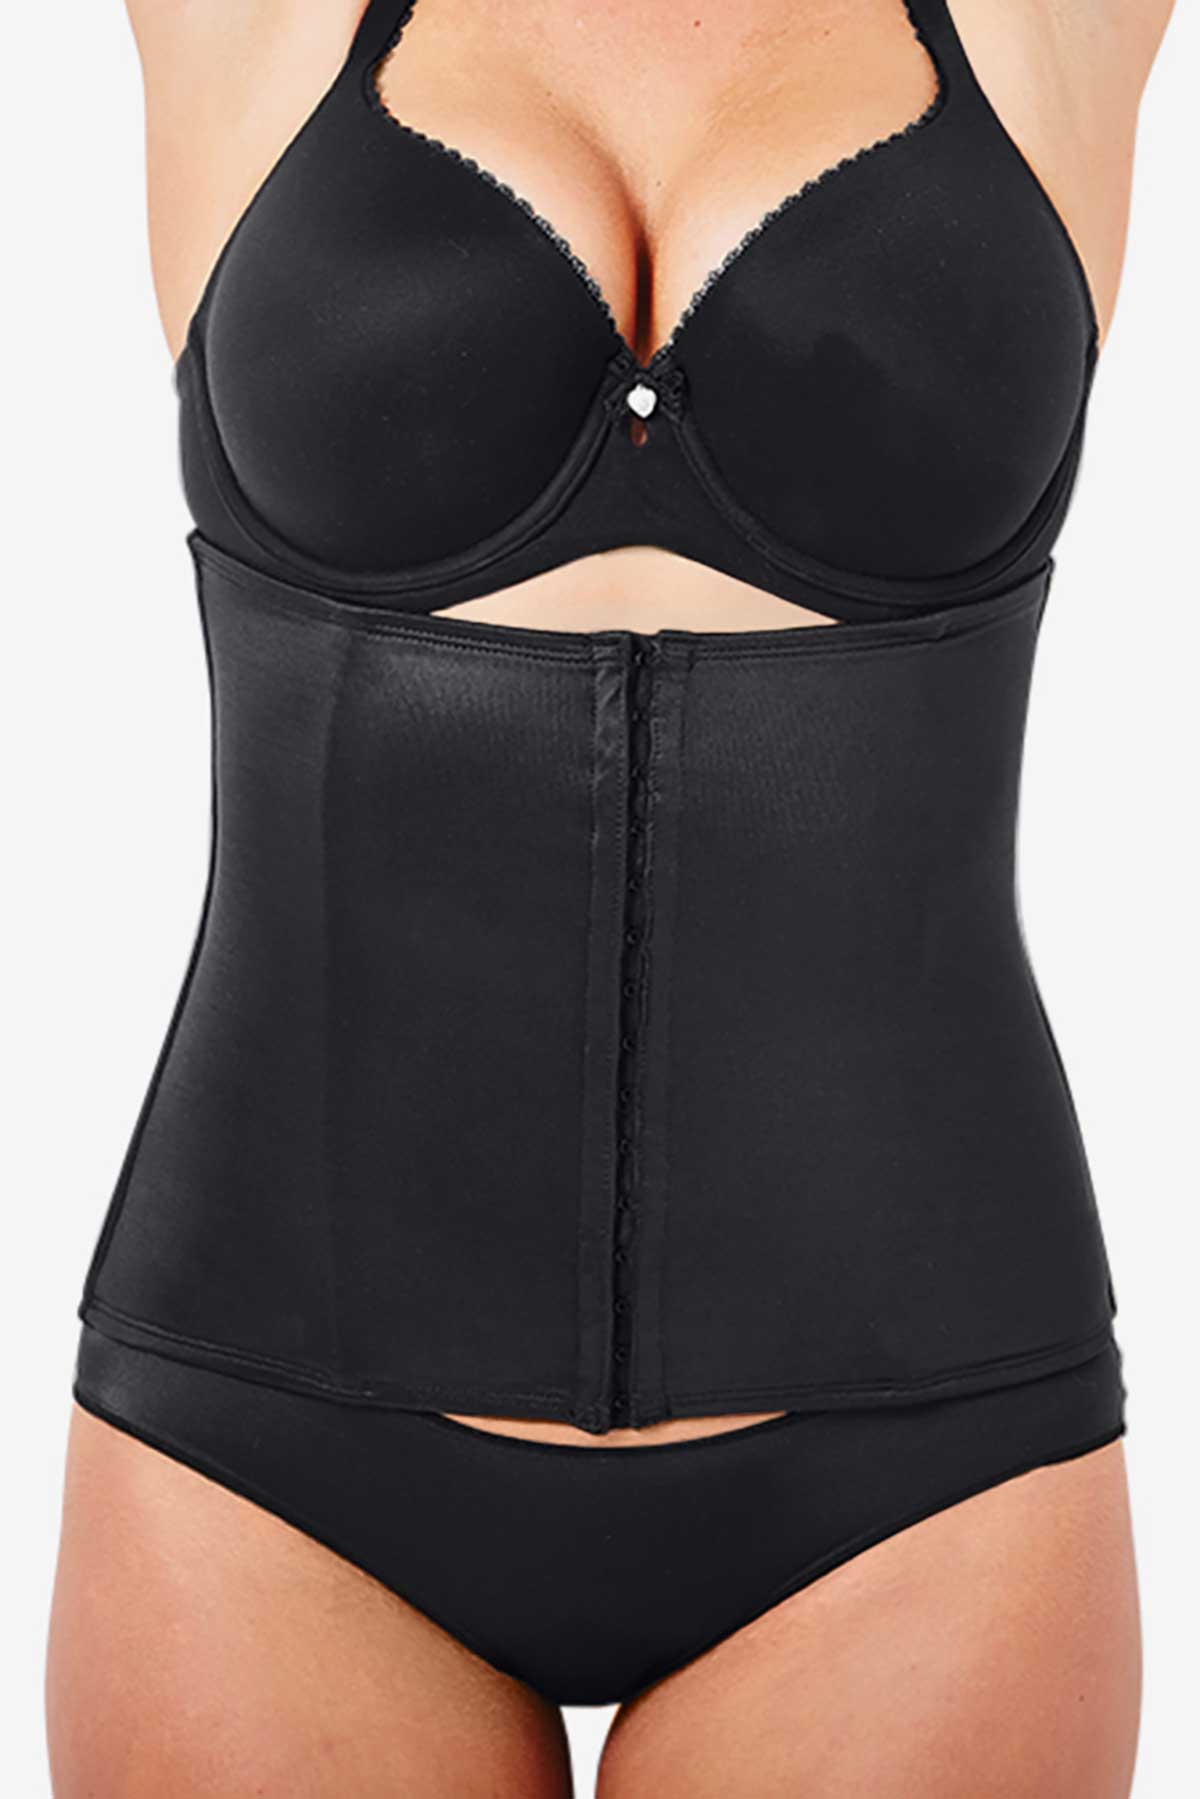 Miraclesuit Extra Firm Control Waist Cincher - Black • Price »